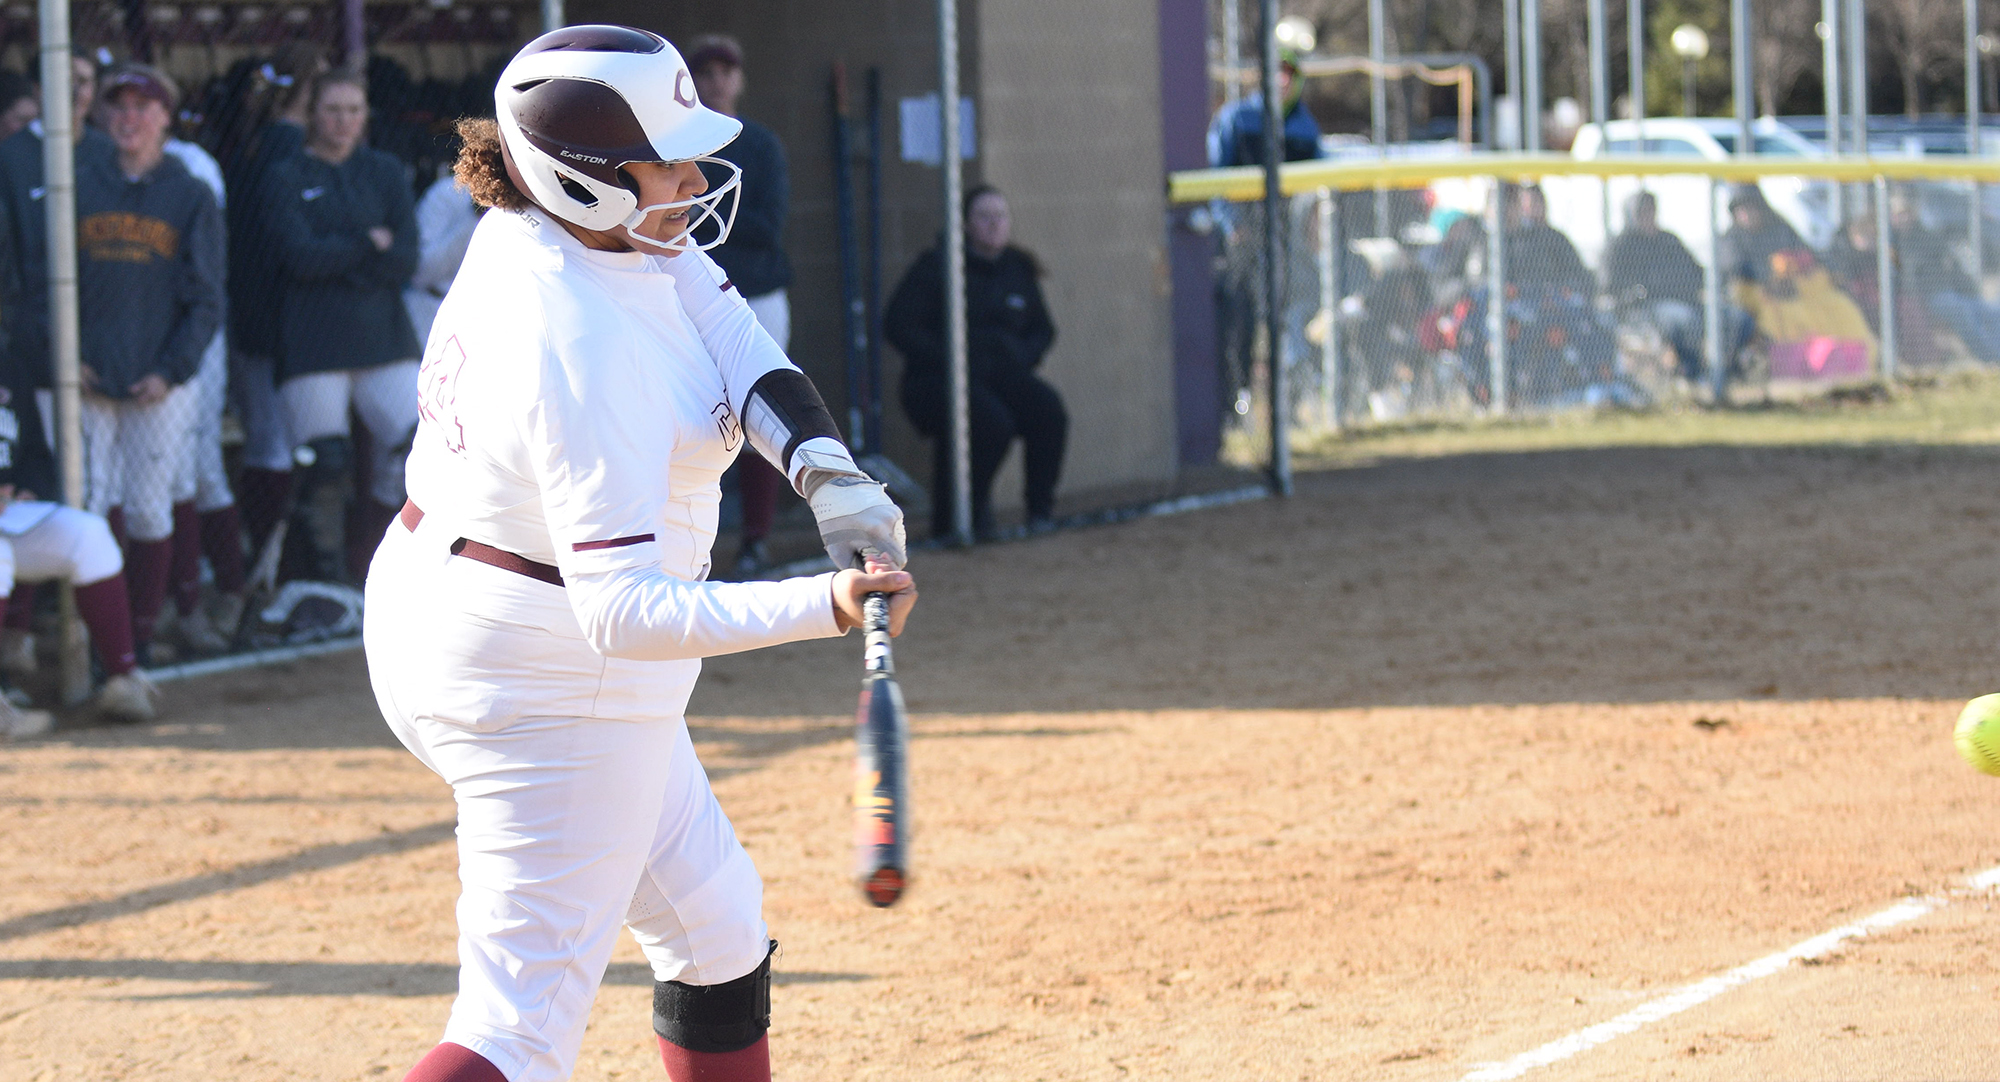 Junior Gabby Brown drove in both the Cobbers' runs in their 3-2 loss to Neumann. She finished the game by going 2-for-3.